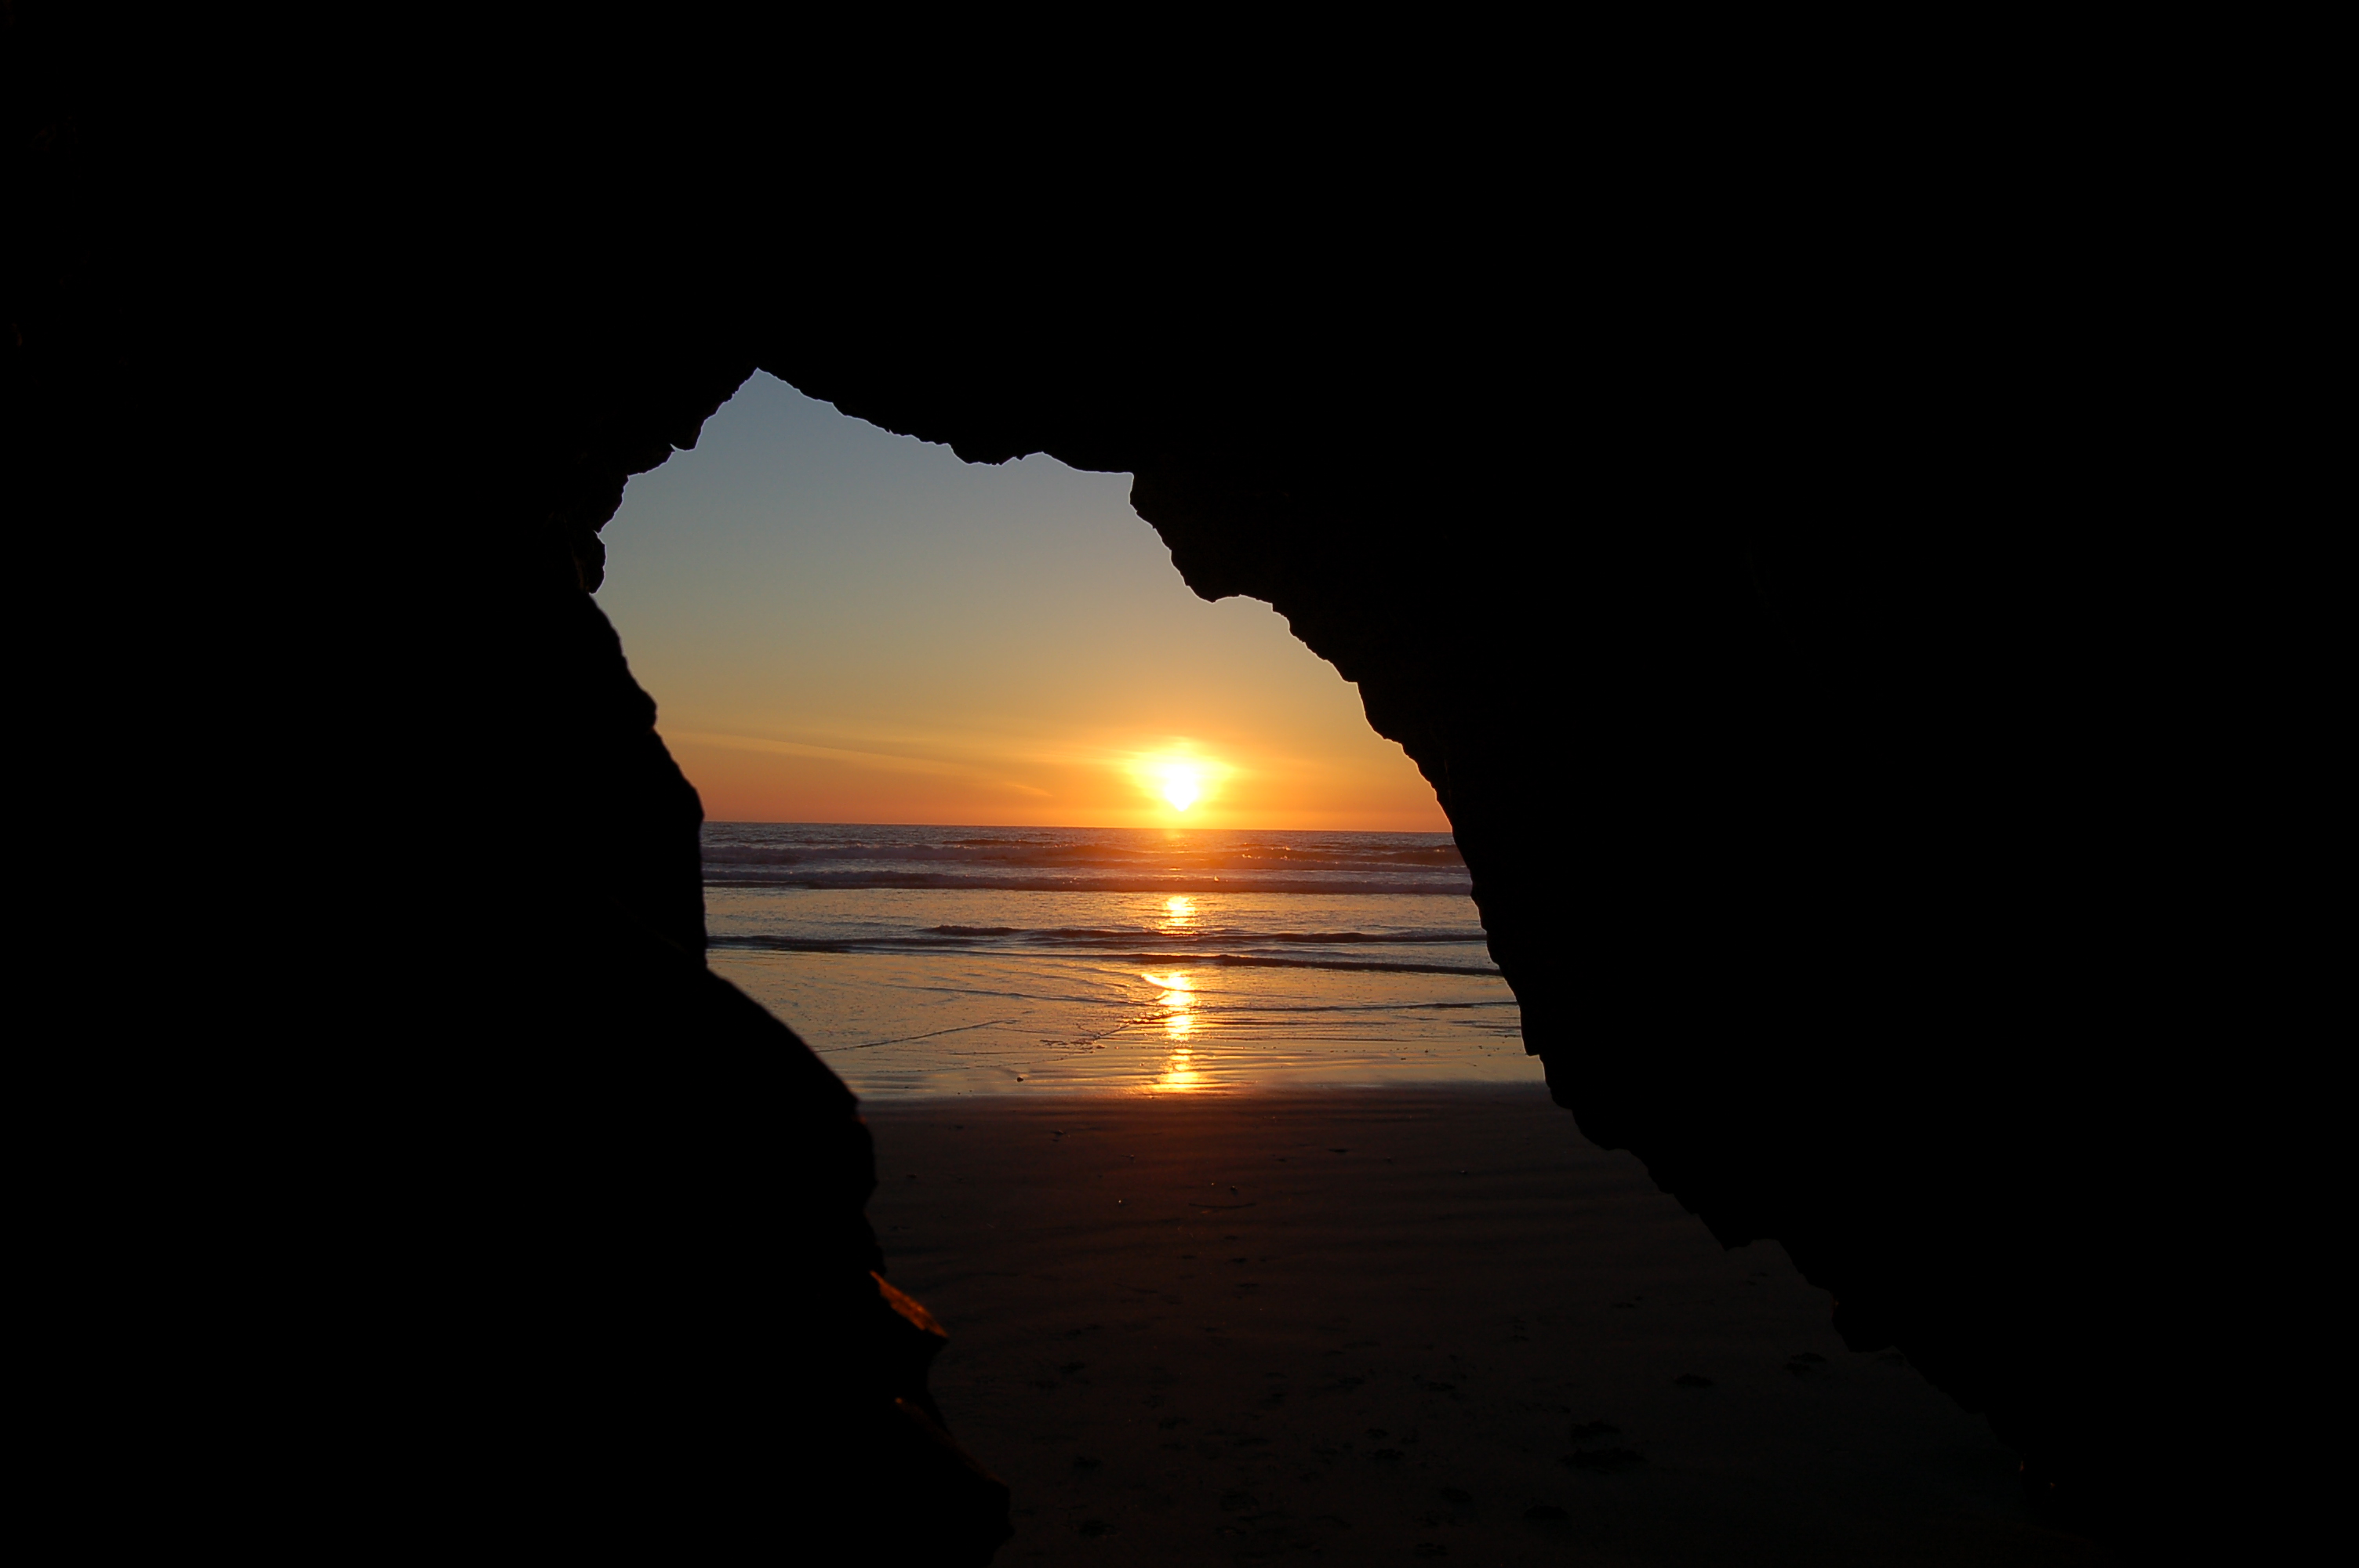 Pizmo Beach California Cave Sunset HD Wallpaper Background Image